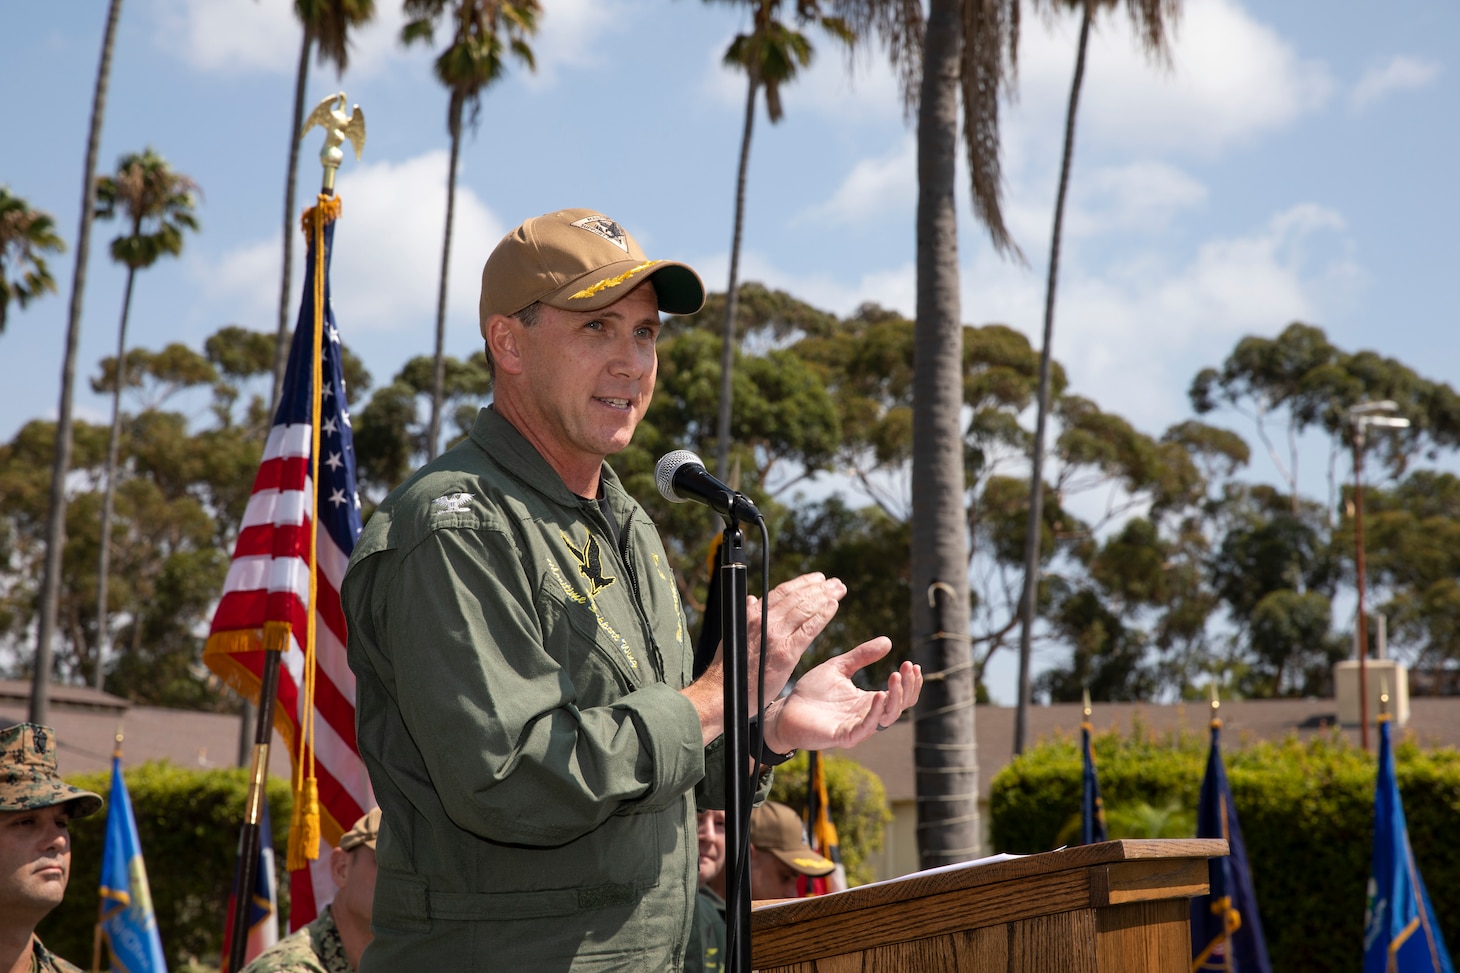 Capt. Rodenbarger, incoming commodore of Maritime Support Wing (MSW), speaks at the MSW Change of Command Ceremony